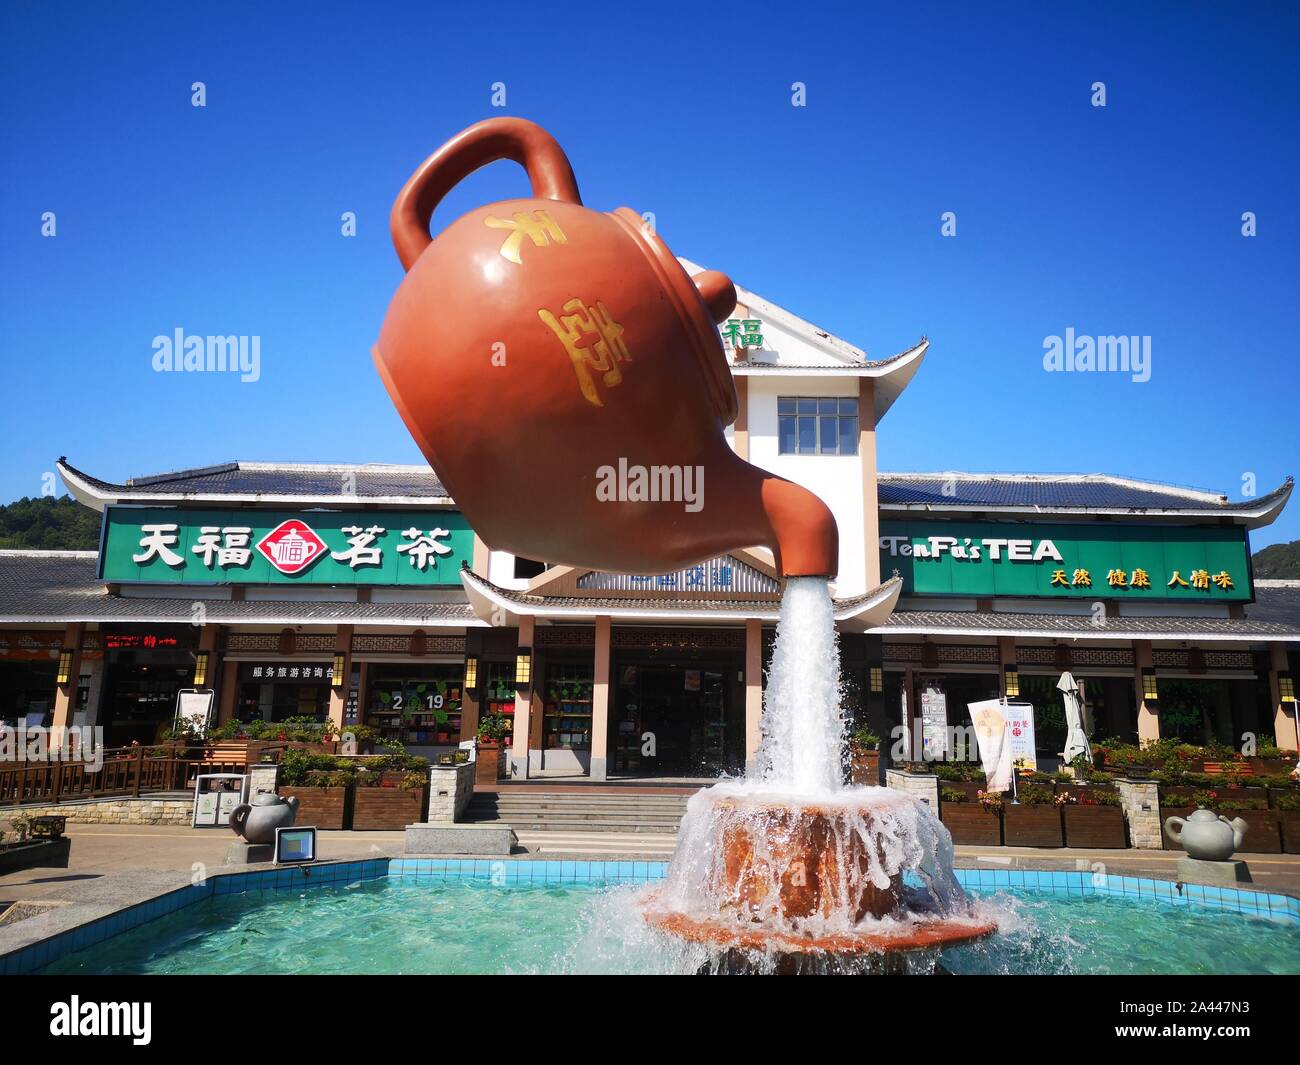 https://c8.alamy.com/comp/2A447N3/a-giant-floating-teapot-and-teacup-water-fountain-is-displayed-at-an-expressway-service-area-in-guiding-county-qiandongnan-miao-and-dong-autonomous-p-2A447N3.jpg